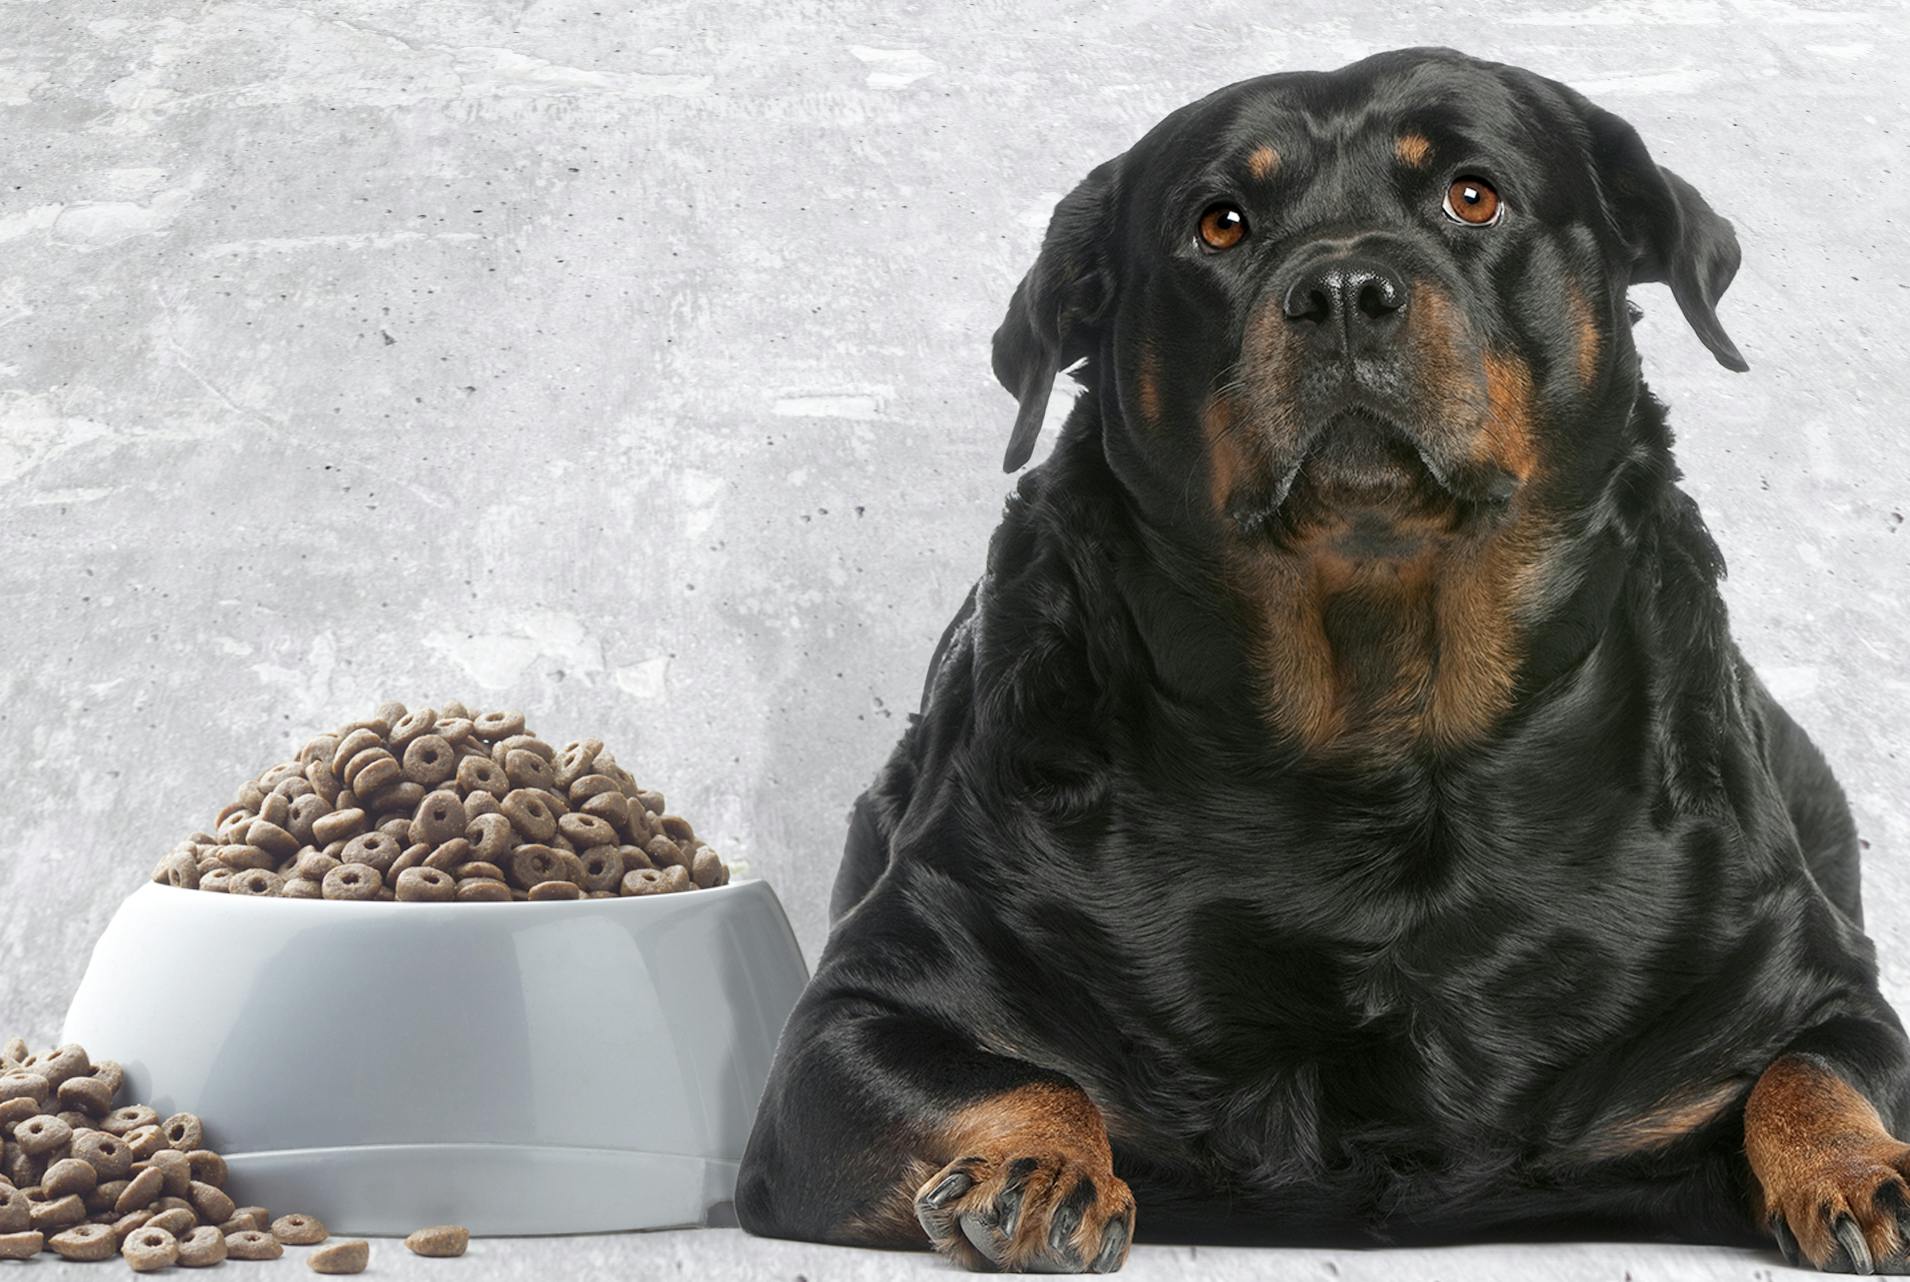 How to Prevent Dog Obesity